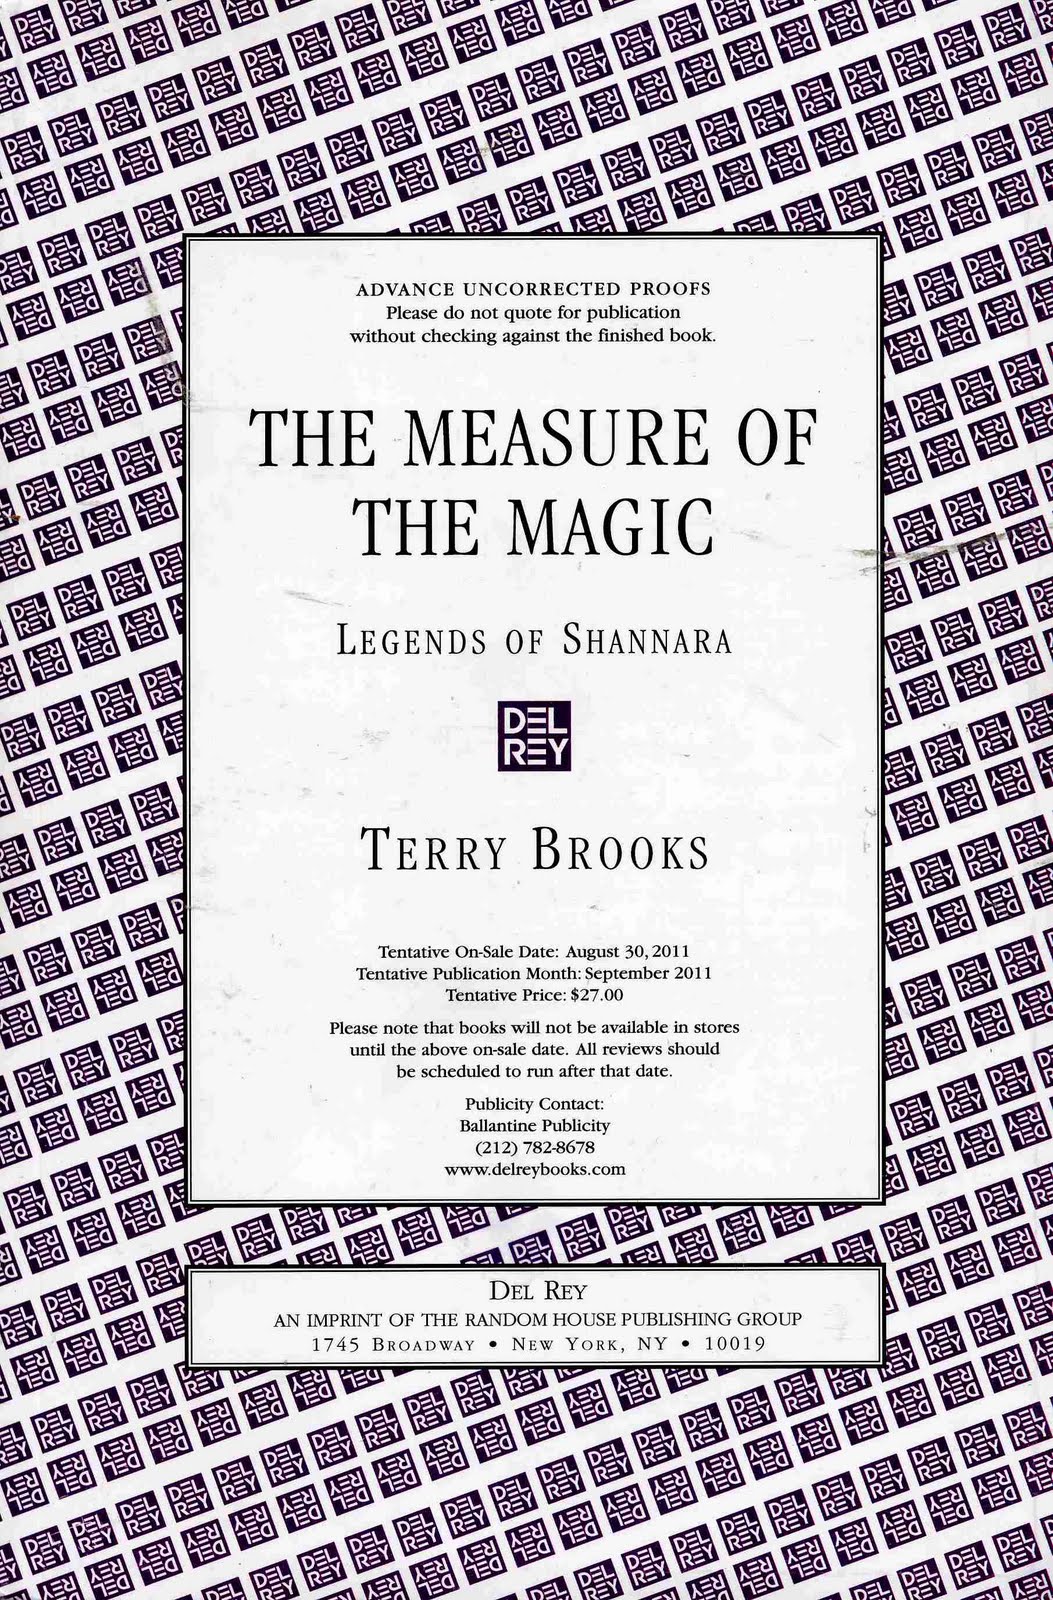 Review The Measure of the Magic by Terry Brooks